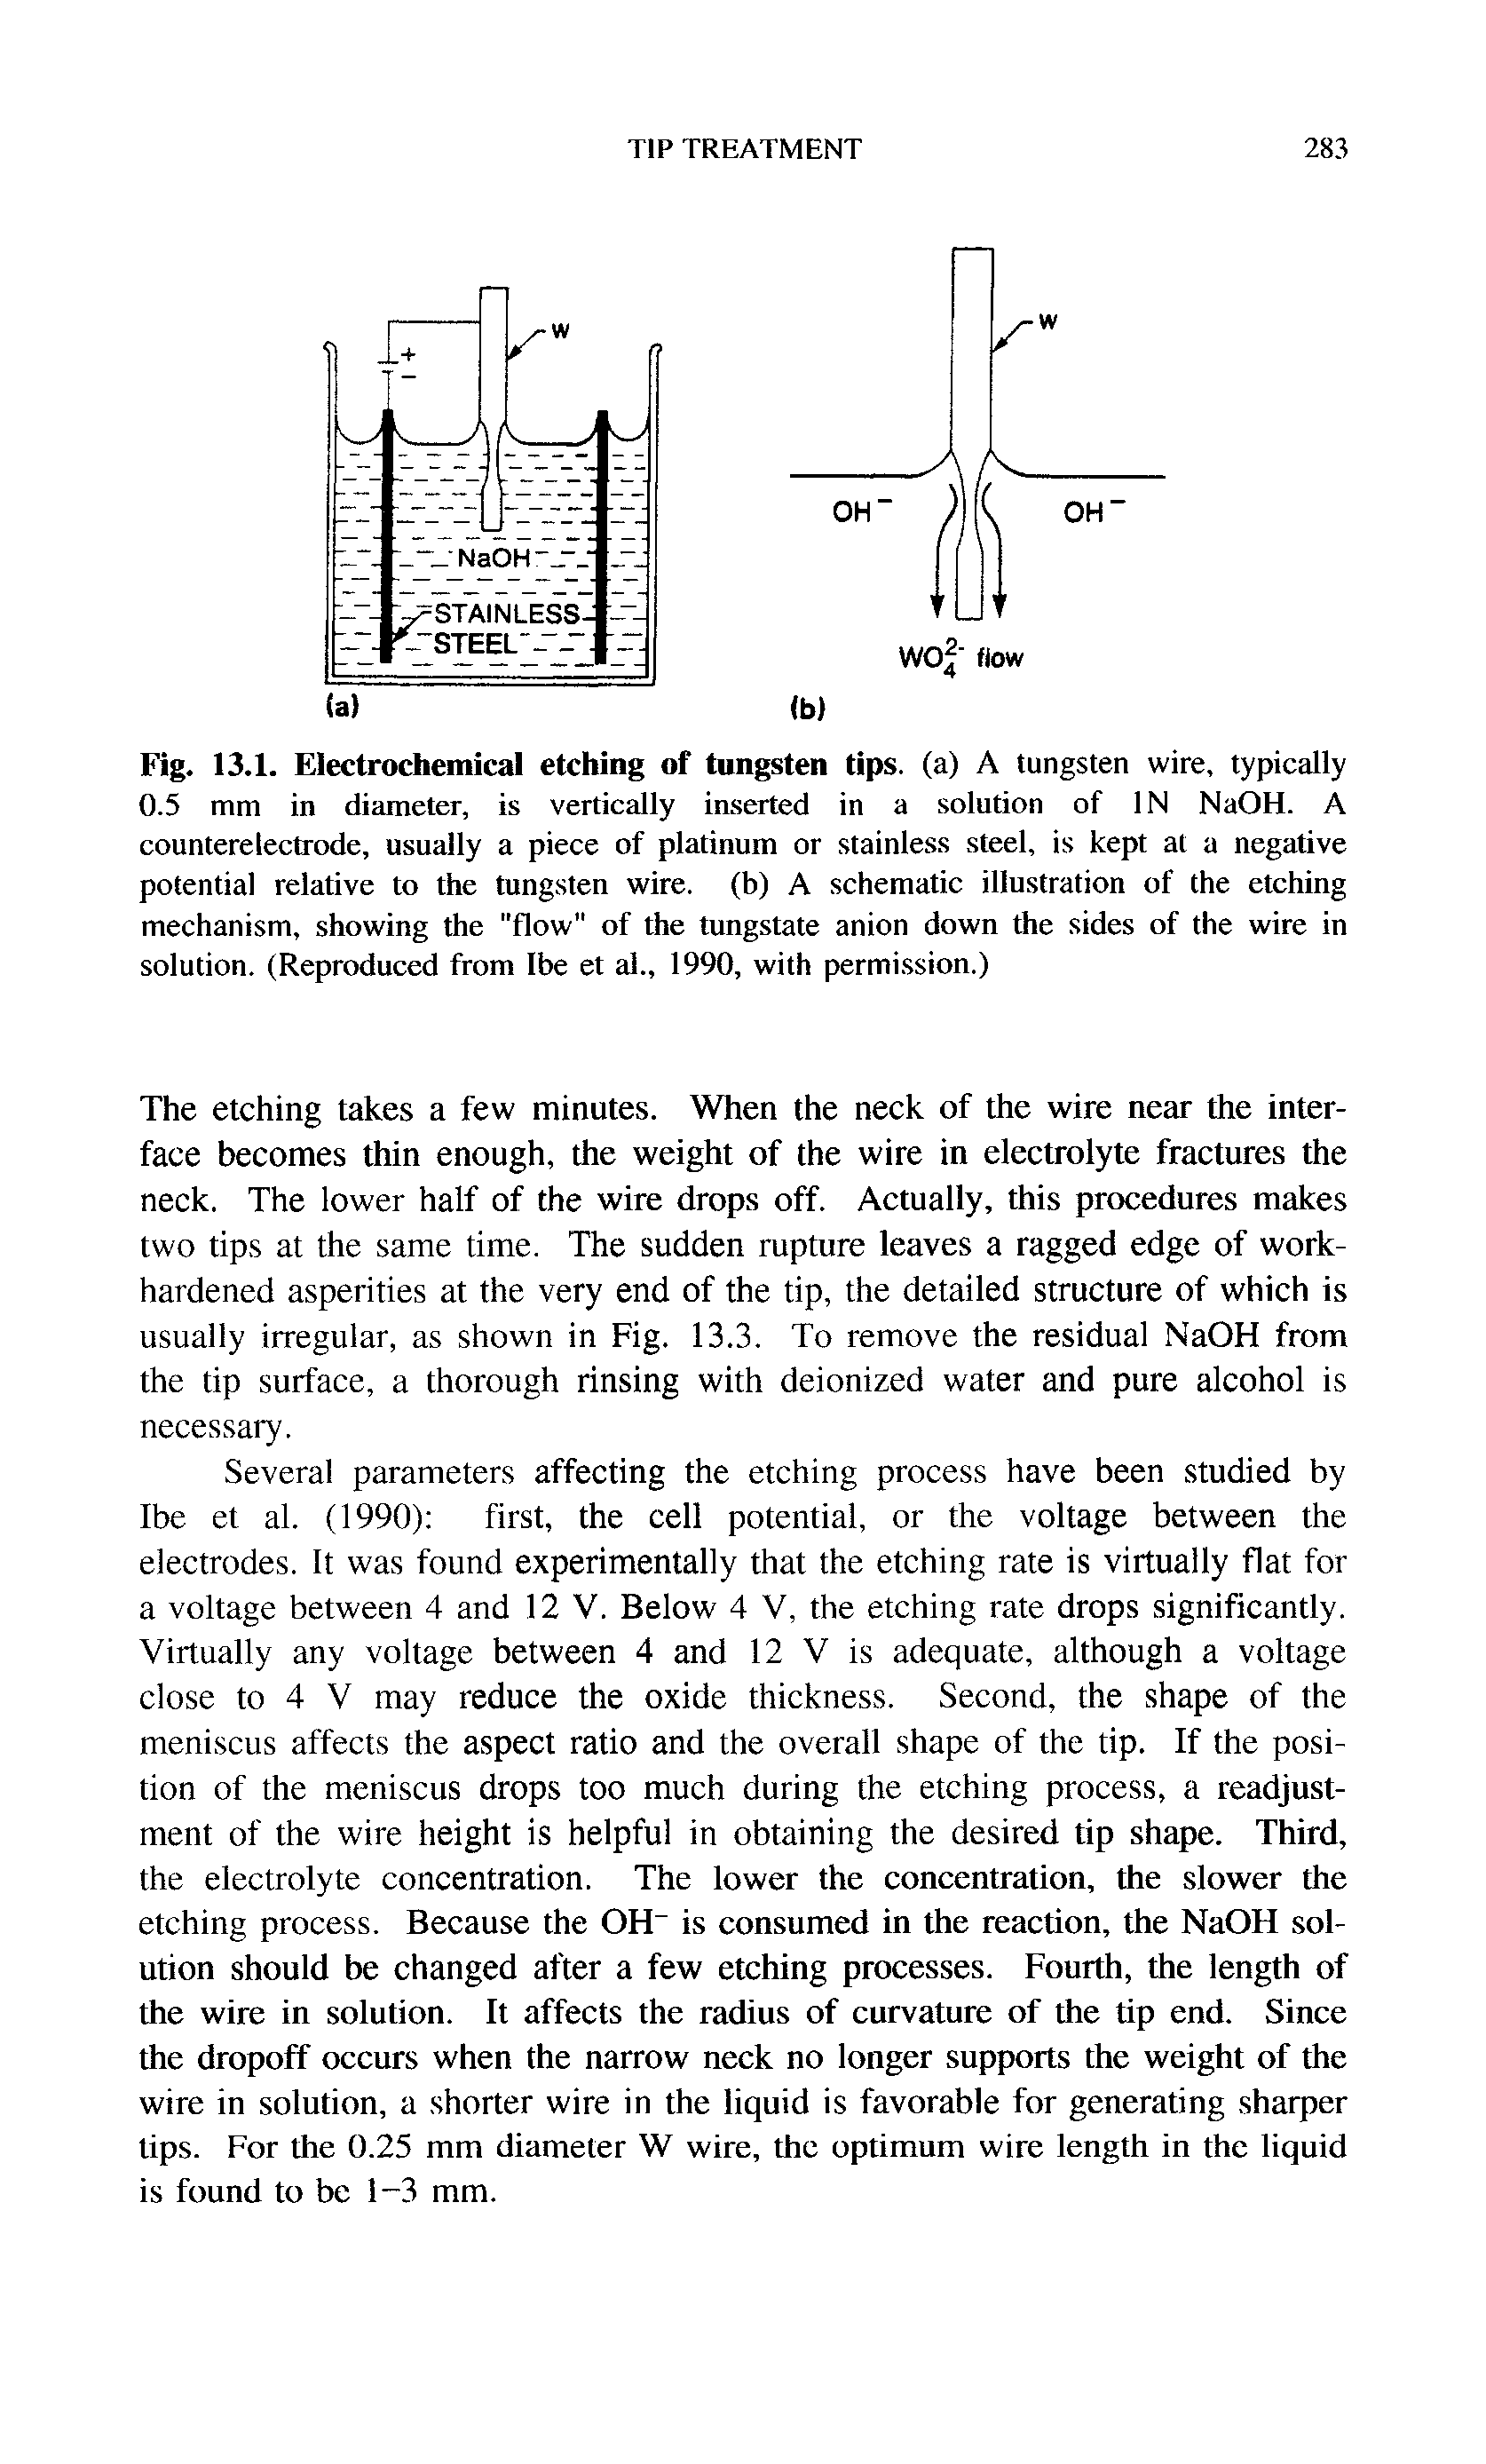 Fig. 13.1. Electrochemical etching of tungsten tips, (a) A tungsten wire, typically 0.5 mm in diameter, is vertically inserted in a solution of IN NaOH. A counterelectrode, usually a piece of platinum or stainless steel, is kept at a negative potential relative to the tungsten wire, (b) A schematic illustration of the etching mechanism, showing the "flow" of the tungstate anion down the sides of the wire in solution. (Reproduced from Ibe et al., 1990, with permission.)...